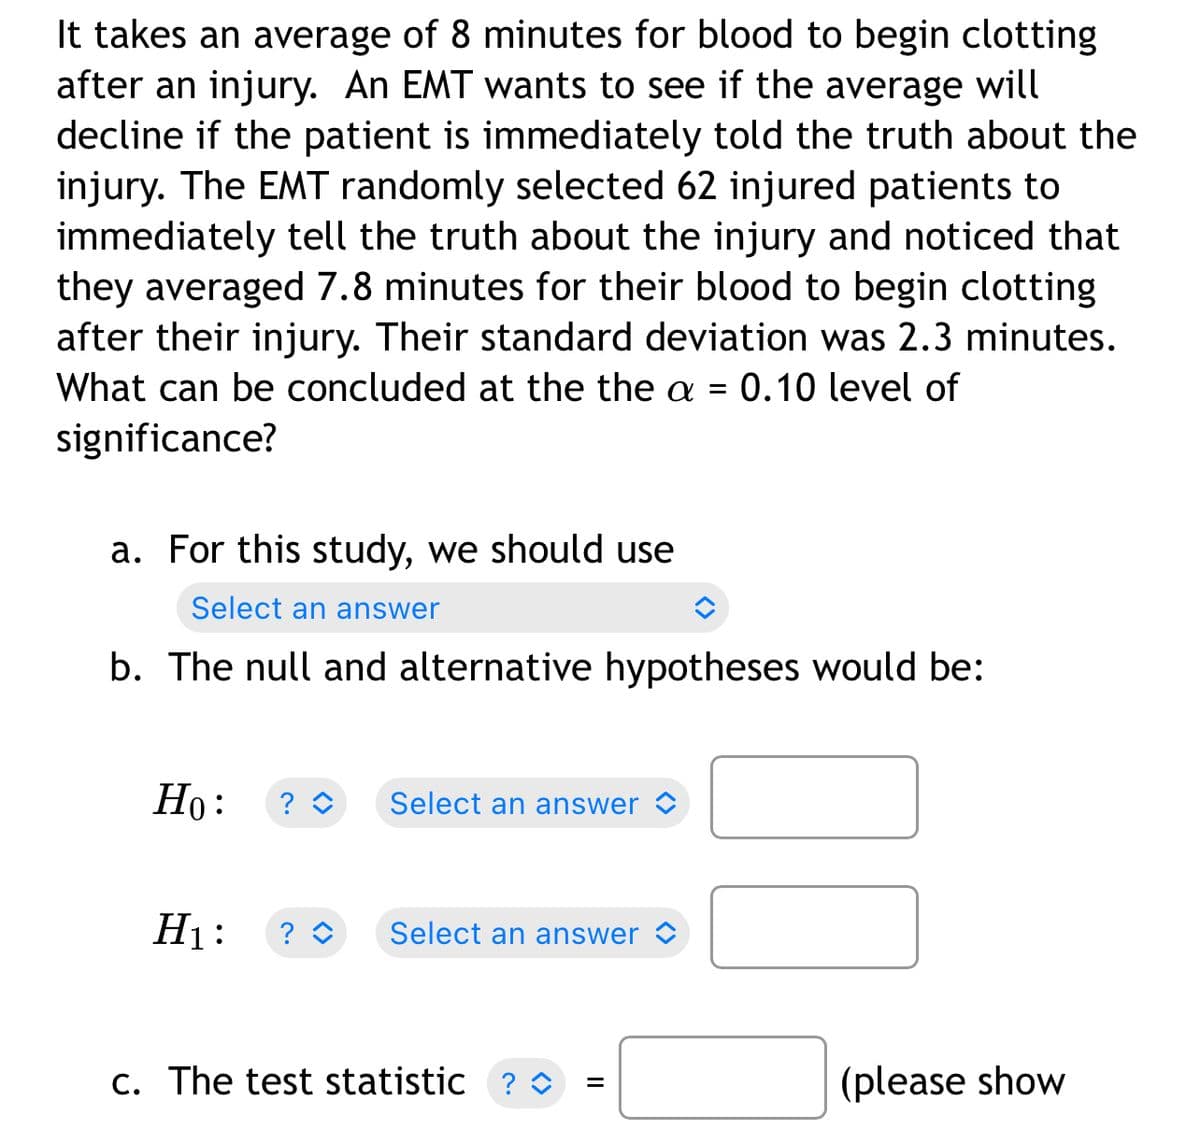 It takes an average of 8 minutes for blood to begin clotting
after an injury. An EMT wants to see if the average will
decline if the patient is immediately told the truth about the
injury. The EMT randomly selected 62 injured patients to
immediately tell the truth about the injury and noticed that
they averaged 7.8 minutes for their blood to begin clotting
after their injury. Their standard deviation was 2.3 minutes.
What can be concluded at the the a = 0.10 level of
significance?
a. For this study, we should use
Select an answer
b. The null and alternative hypotheses would be:
Но:
? O
Select an answer
H1:
? O
Select an answer
c. The test statistic
? O
(please show
II
